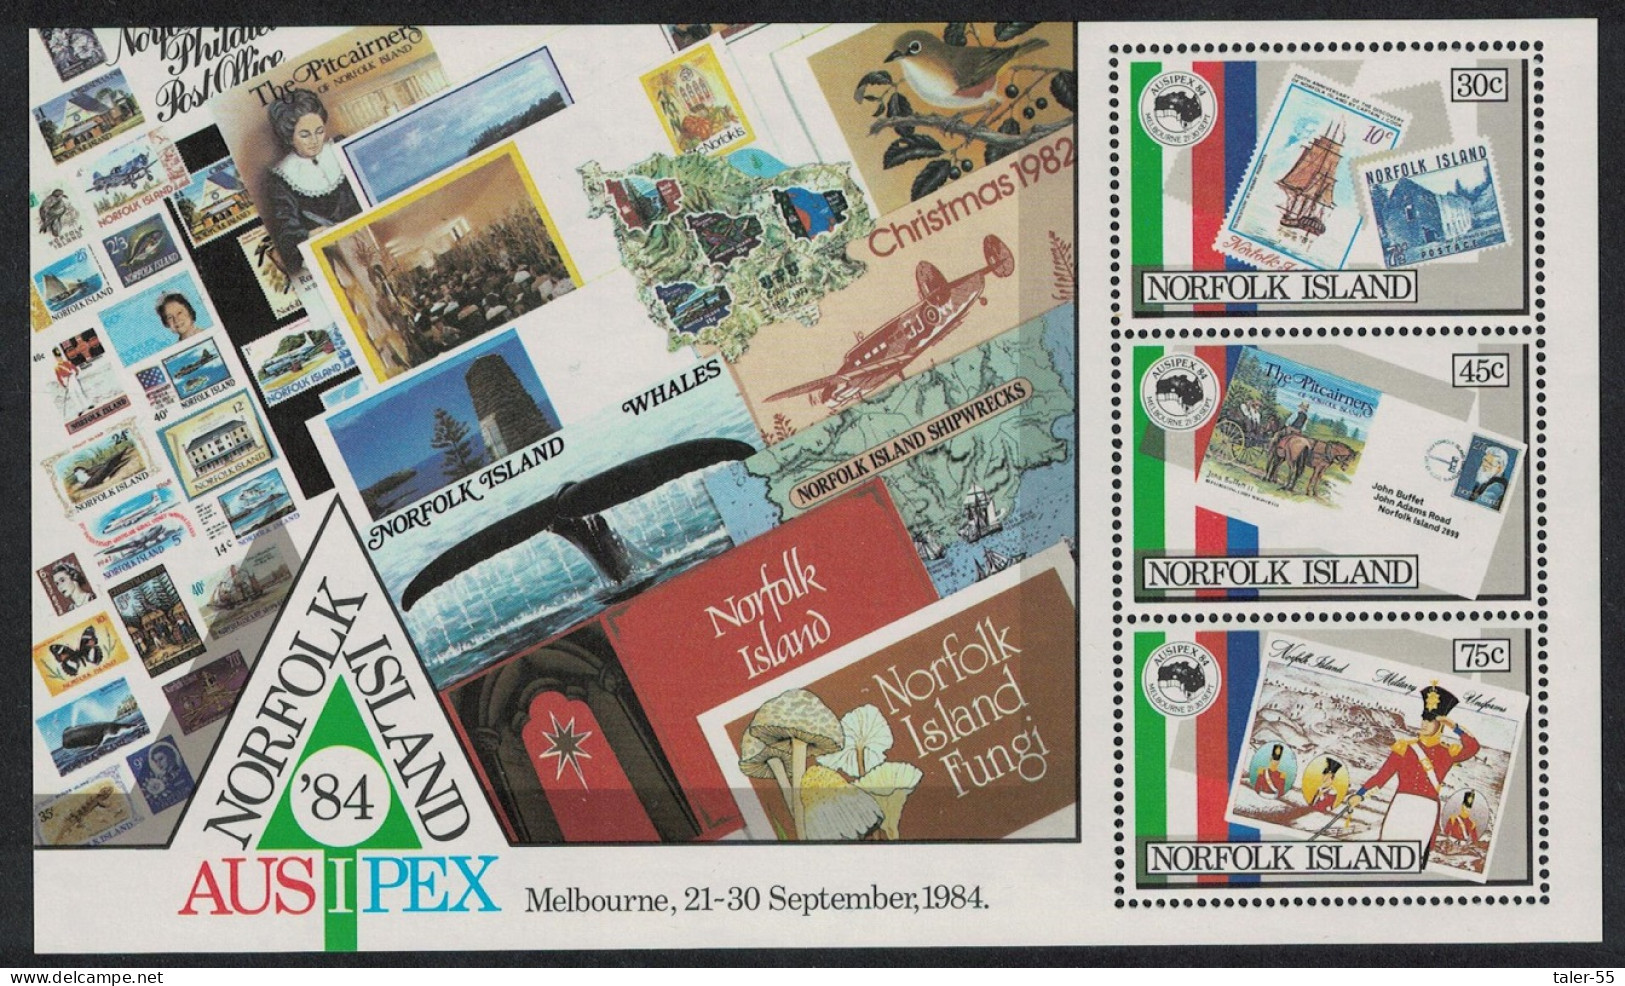 Norfolk 'Ausipex' Stamp Exhibition Melbourne MS 1984 MNH SG#MS346 Sc#346a - Norfolkinsel